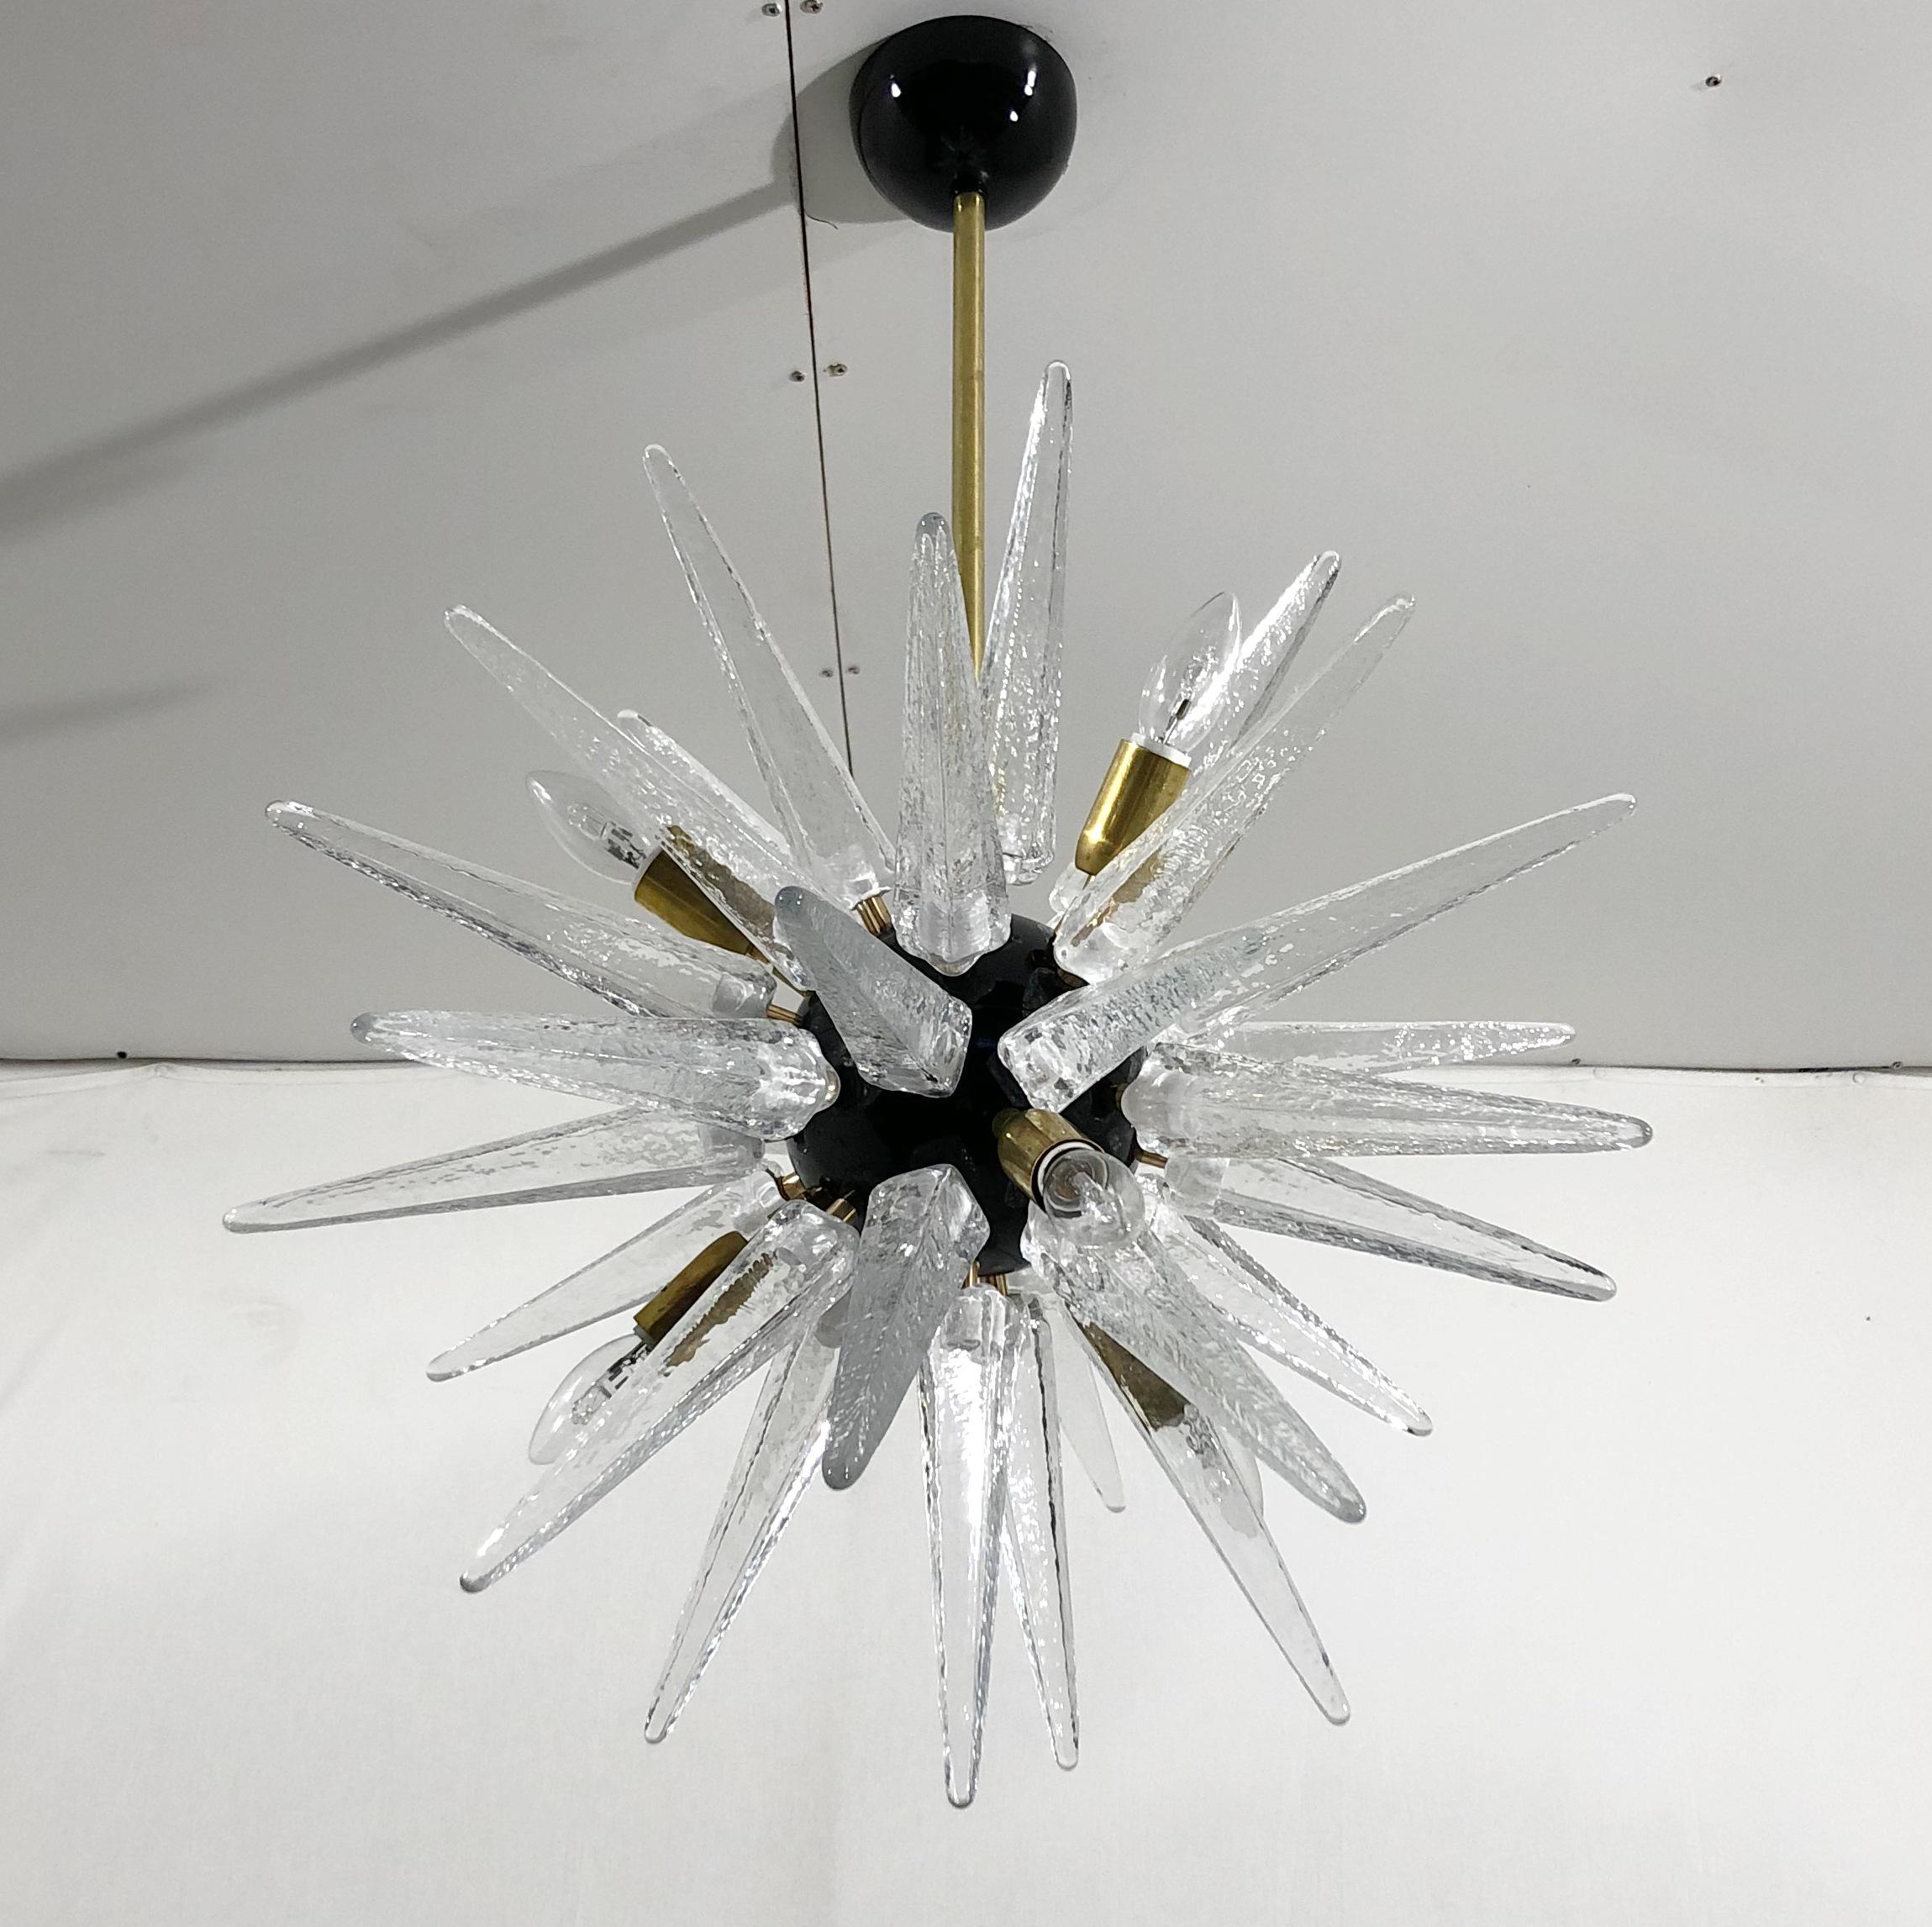 Italian modern Sputnik chandelier with clear murano glass shards spikes, mounted on natural unlacquered brass frame with glossy black centre and canopy, designed by Fabio Bergomi for Fabio Ltd / Made in Italy
6 lights / E12 or E14 type / max 40W